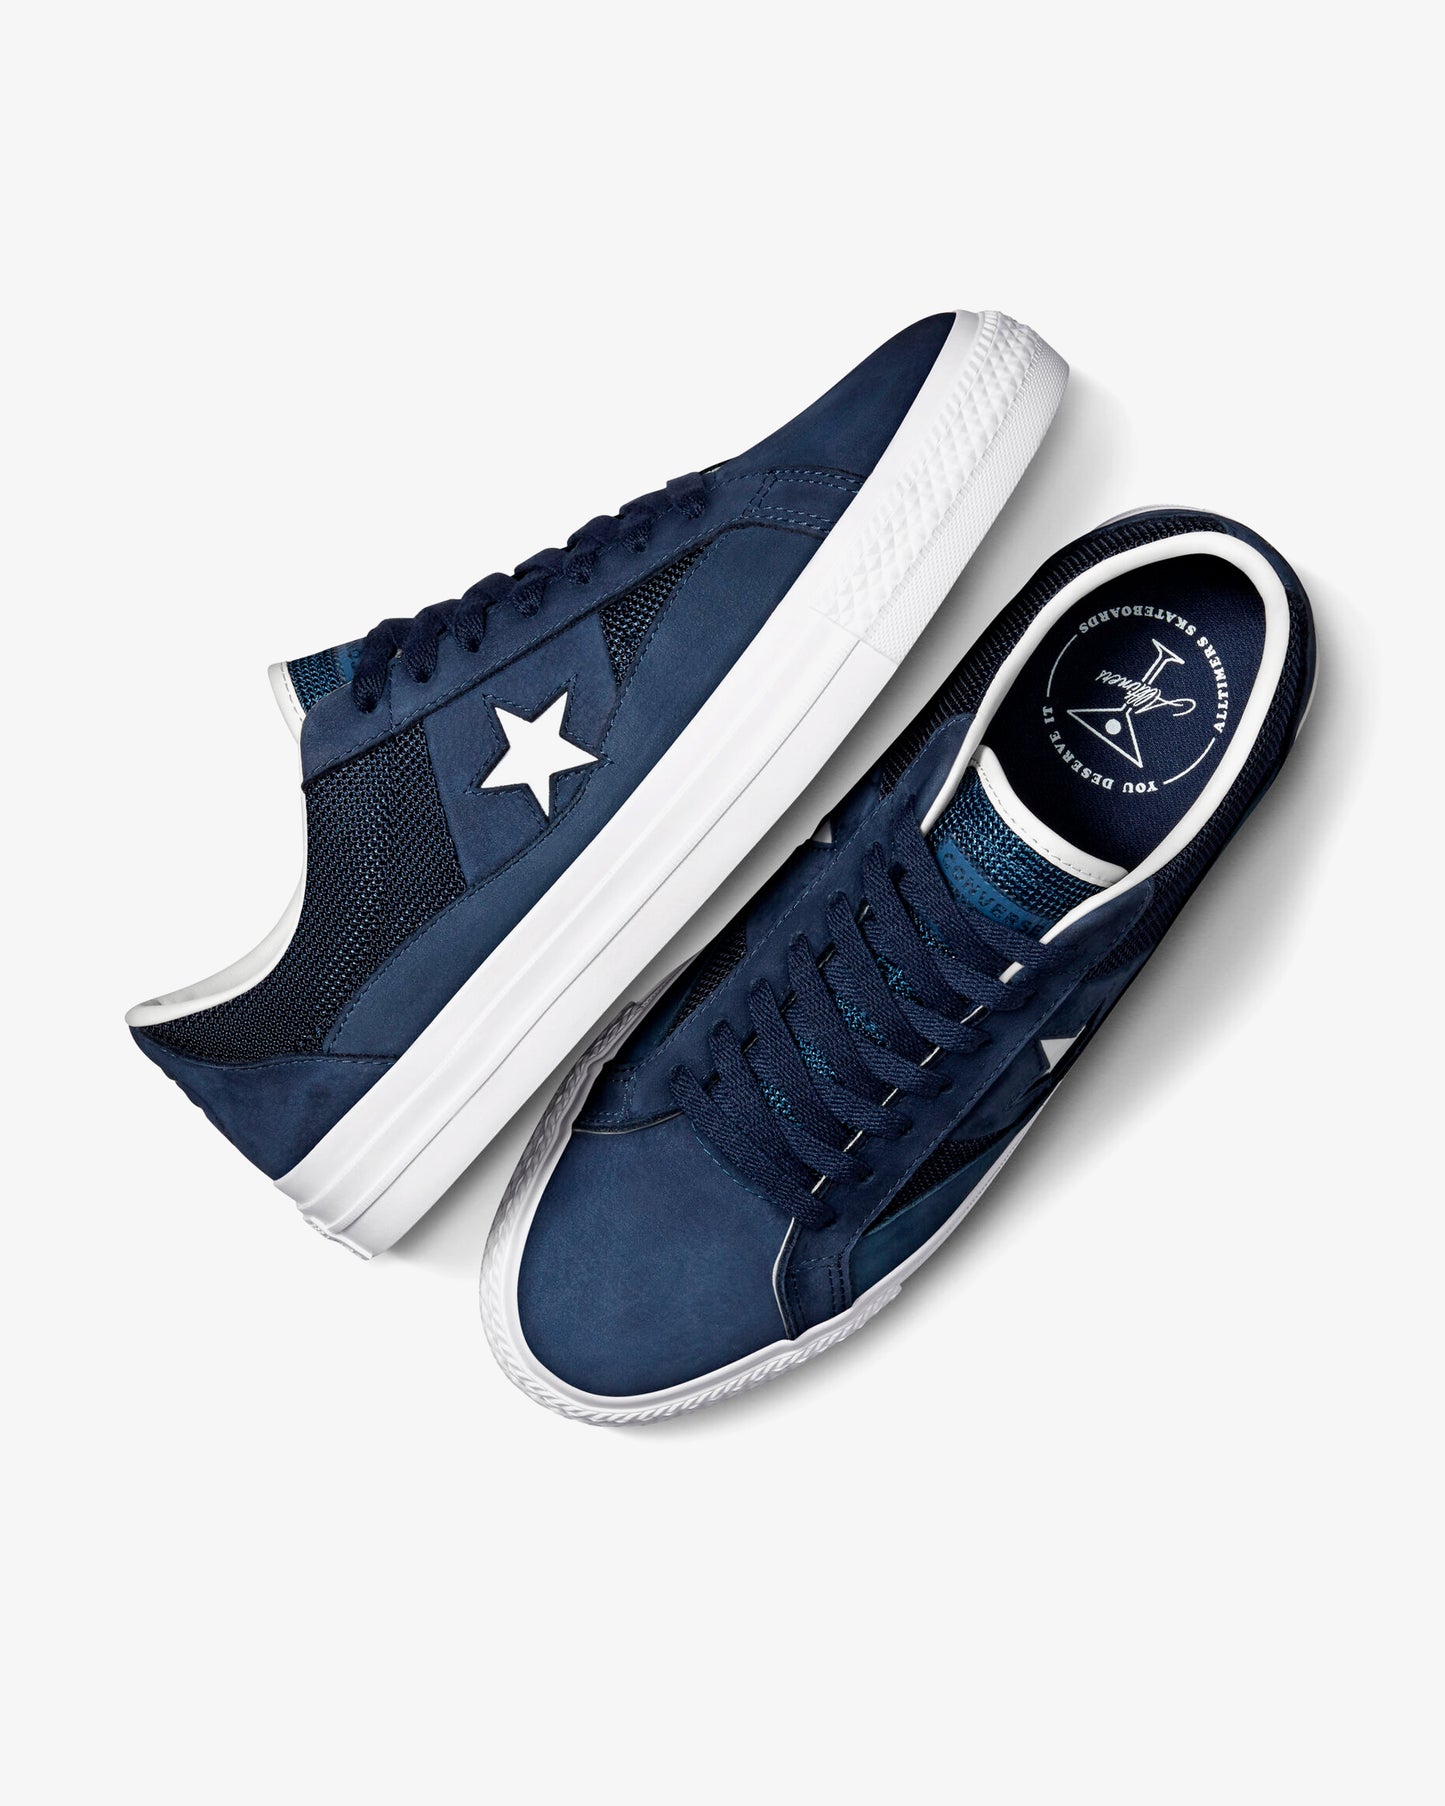 Converse One Star Pro Ox "Alltimers"